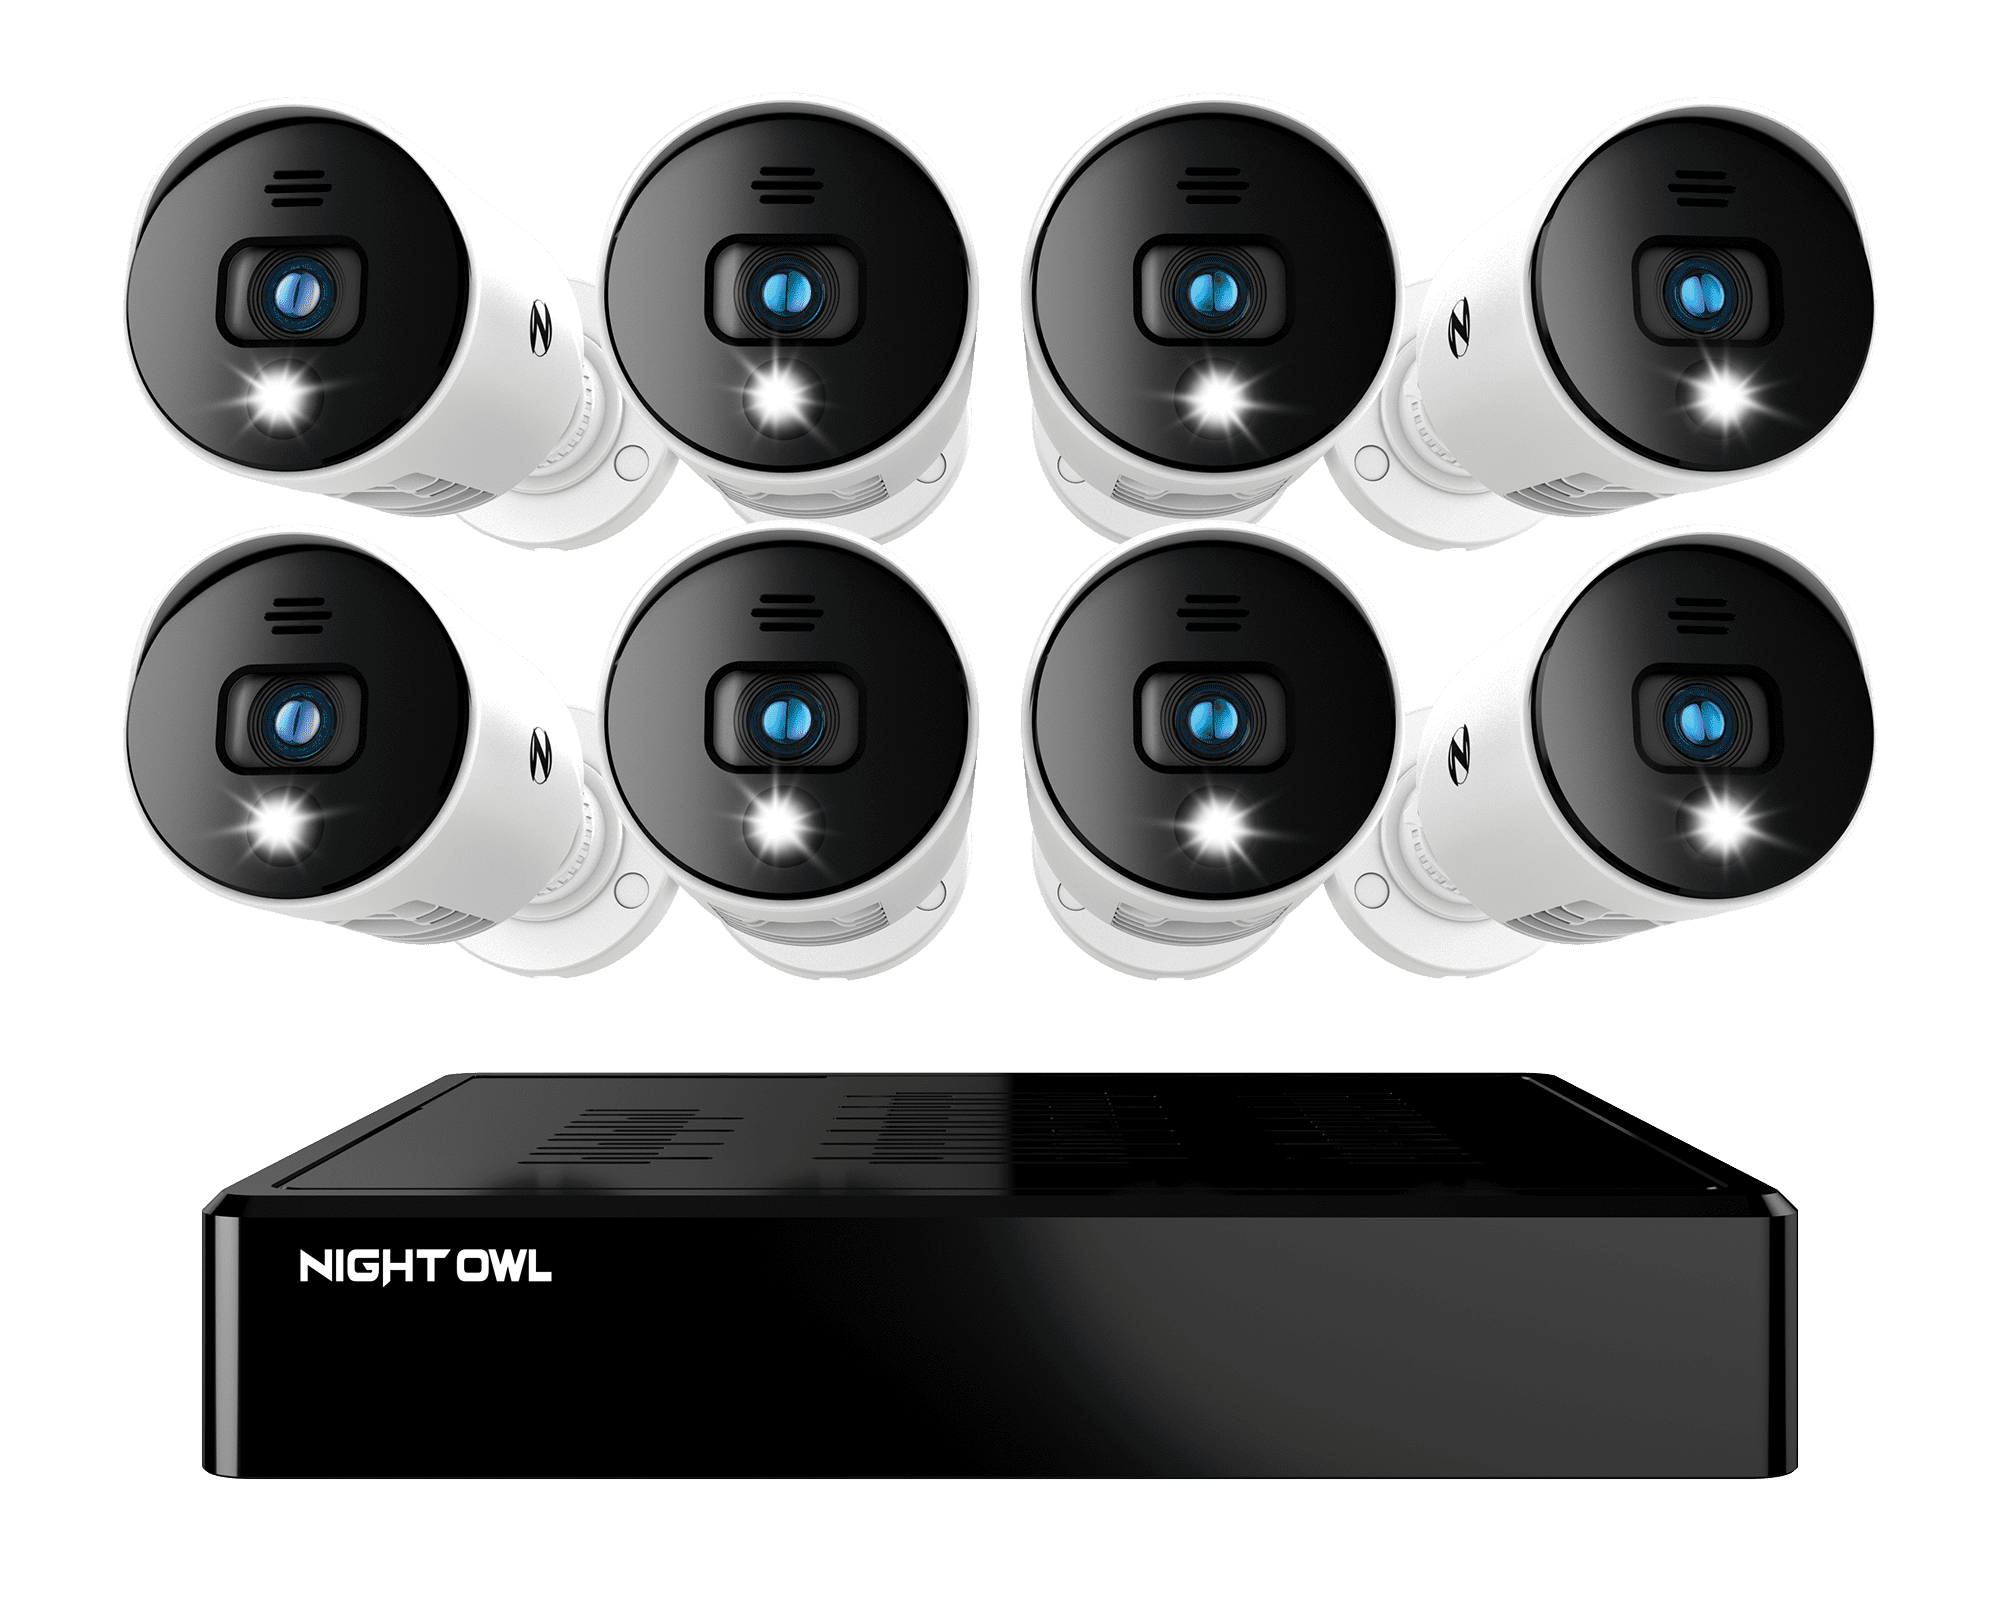 Night Owl Security Camera System CCTV, 8 Channel Bluetooth DVR with 1TB Hard Drive, 8 Wired 1080p HD Spotlight Surveillance Bullet Cameras, Audio Enabled Indoor Outdoor Cameras with Night Vision